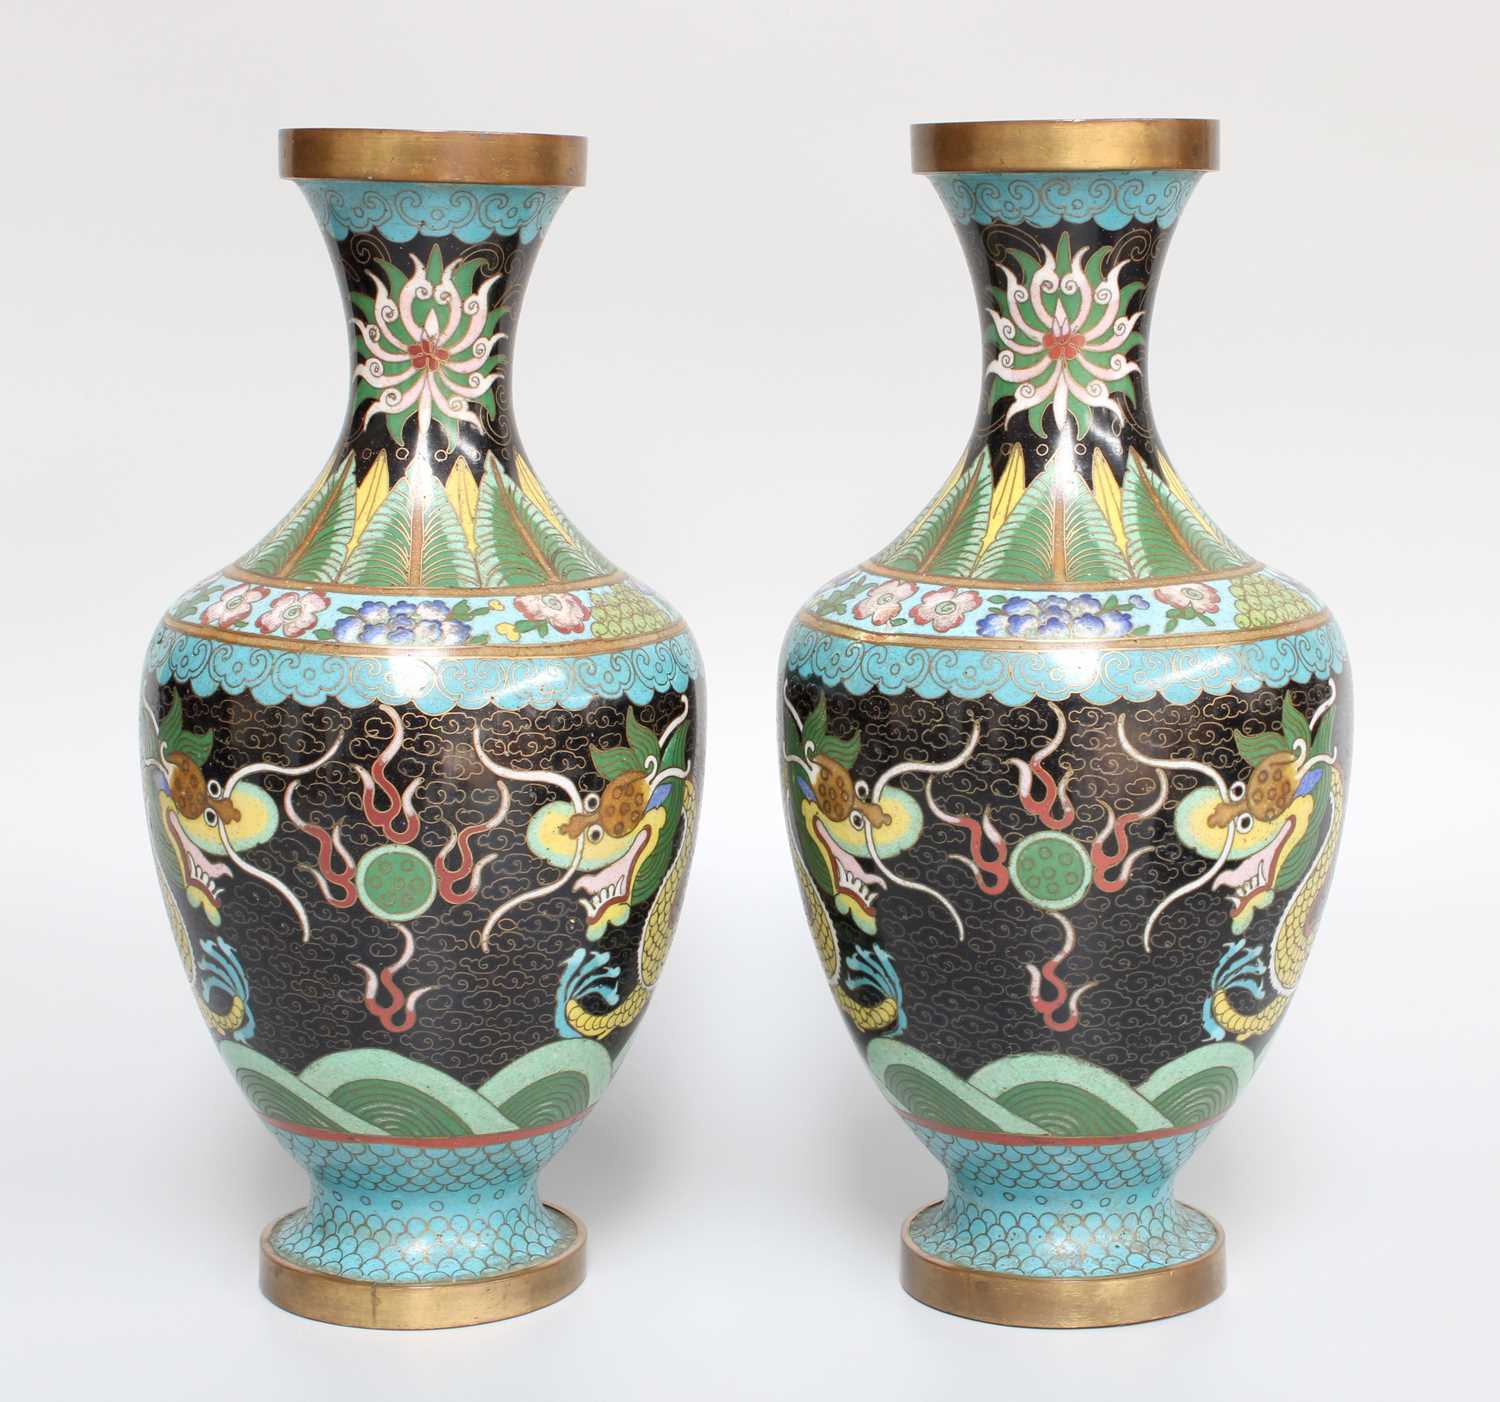 A Pair of 20th Century Japanese Cloisonne Vases, decorated with dragons, 24cm high Please note